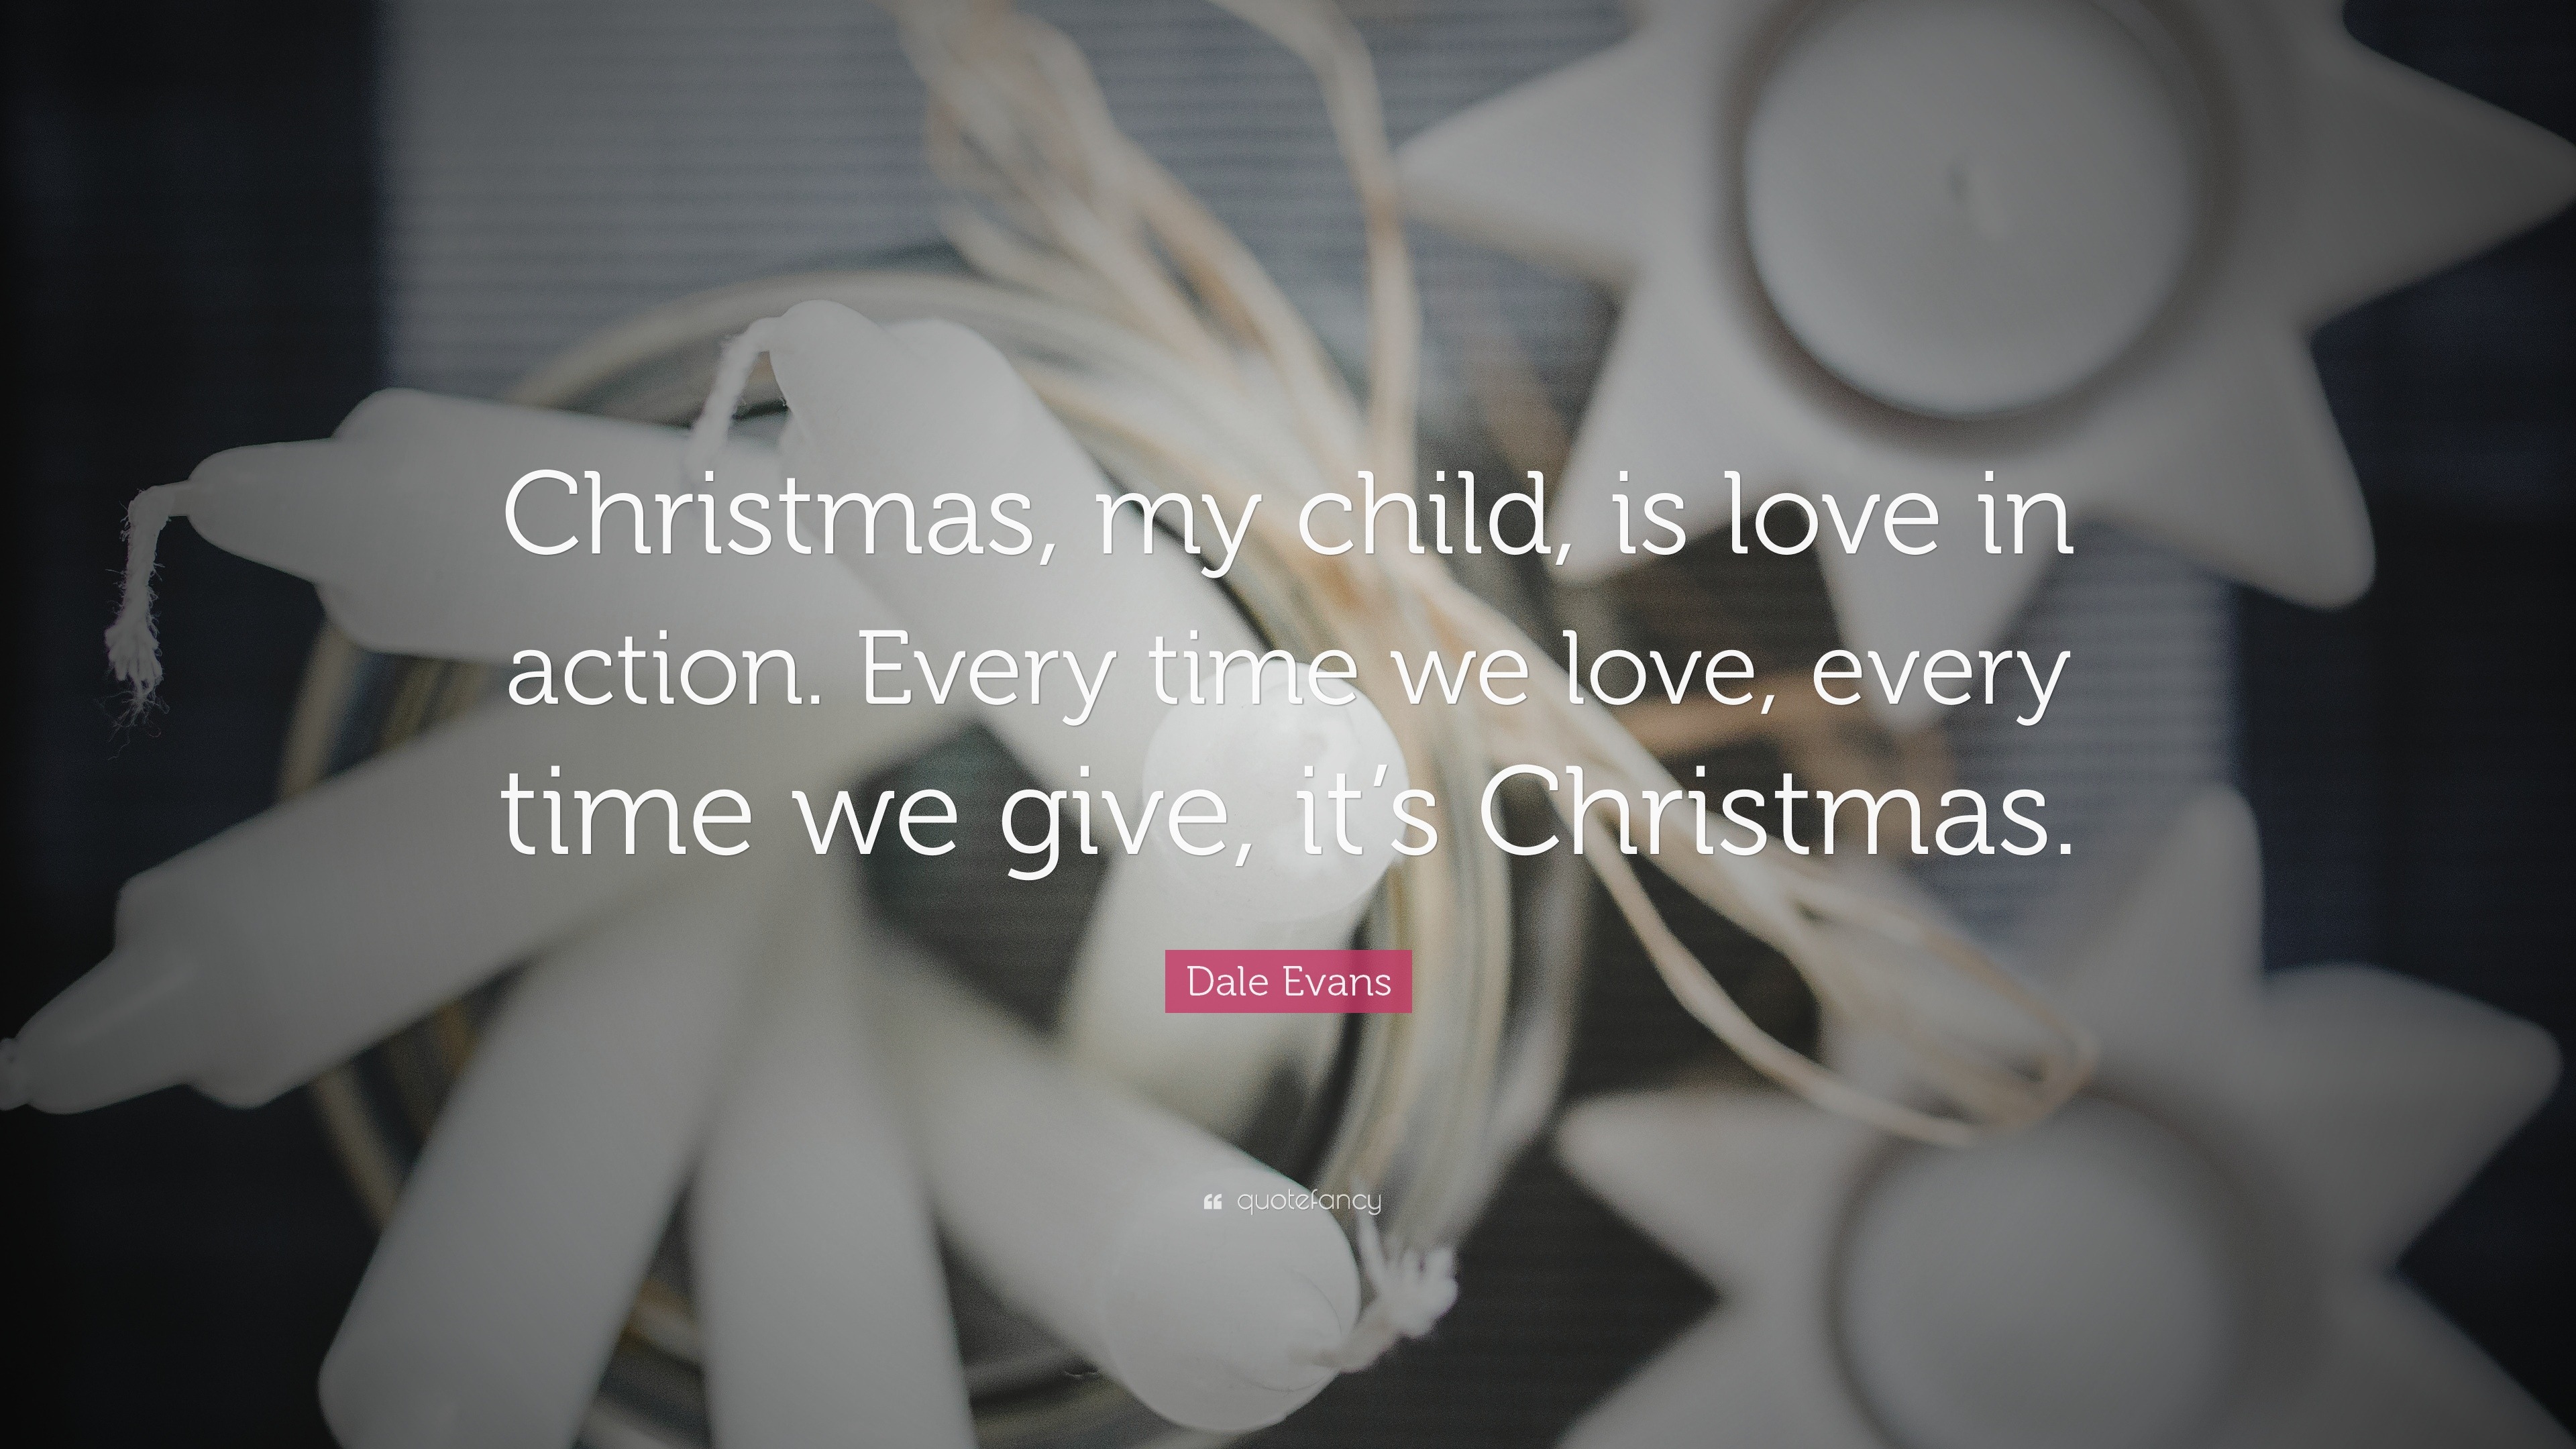 Dale Evans Quote “Christmas my child is love in action Every